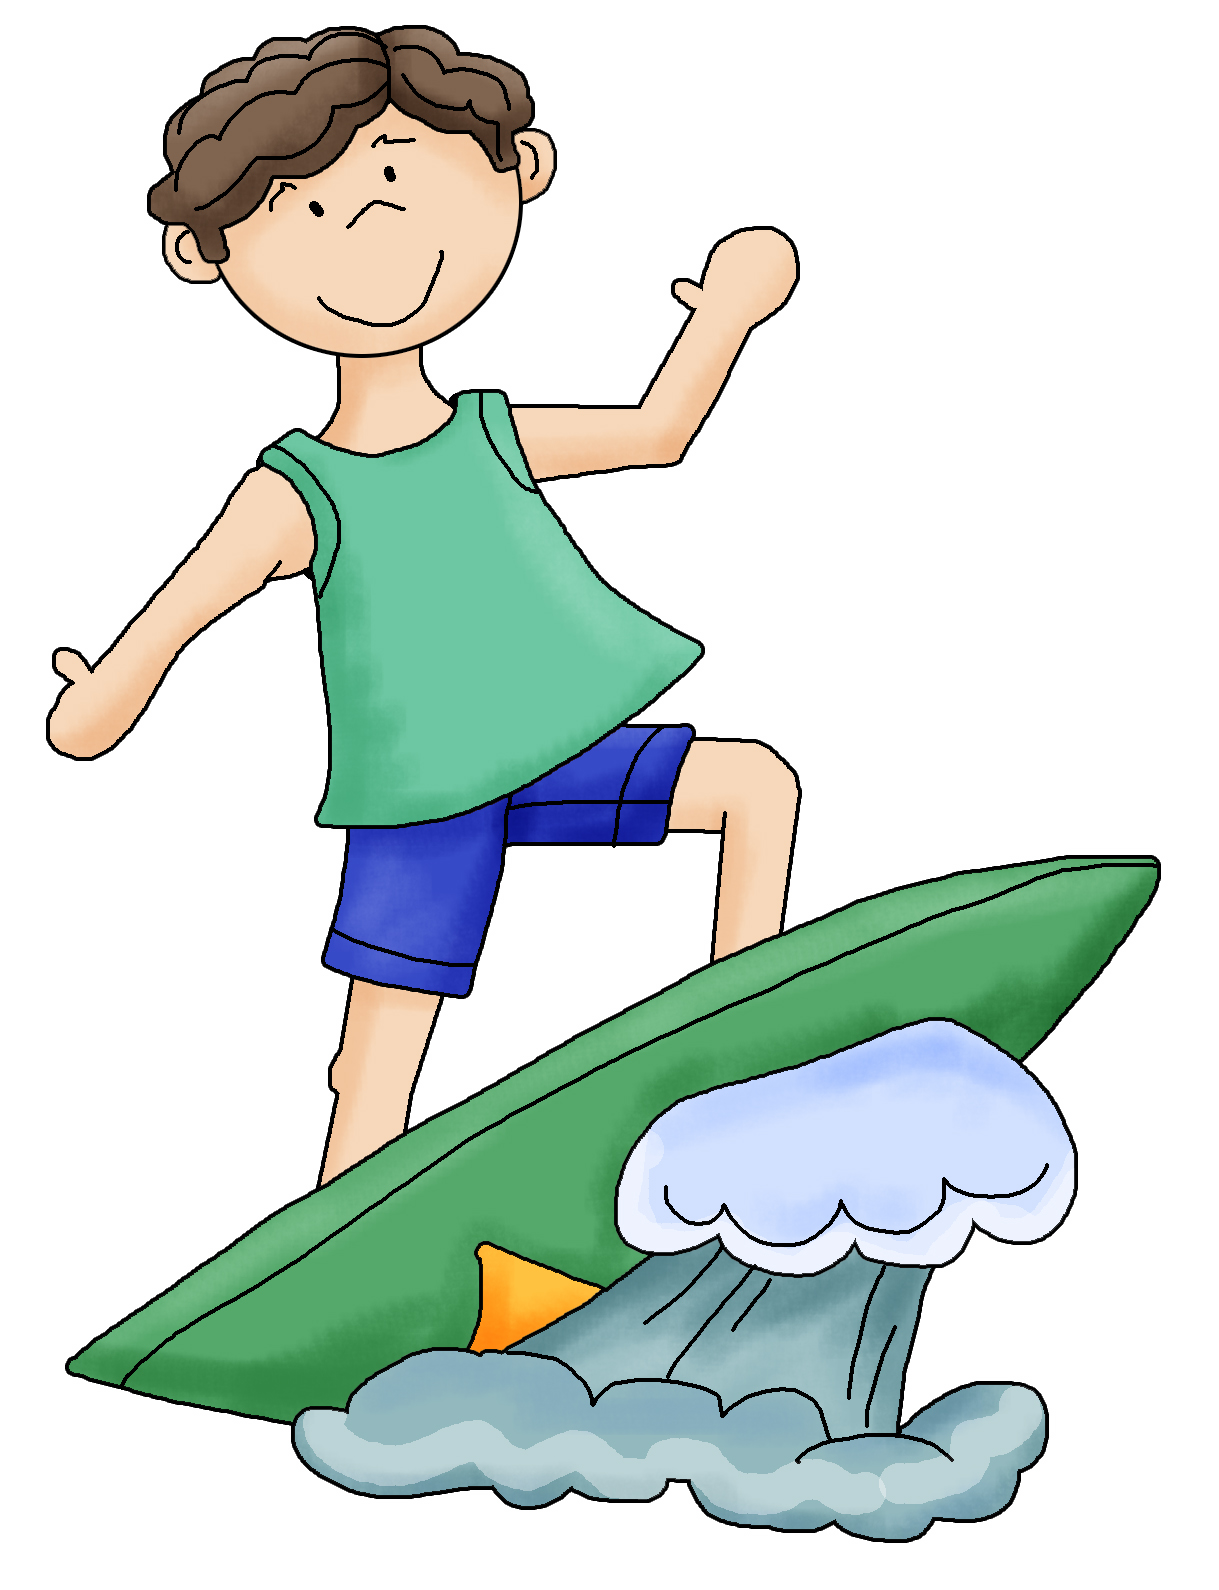 Free surfer cliparts.